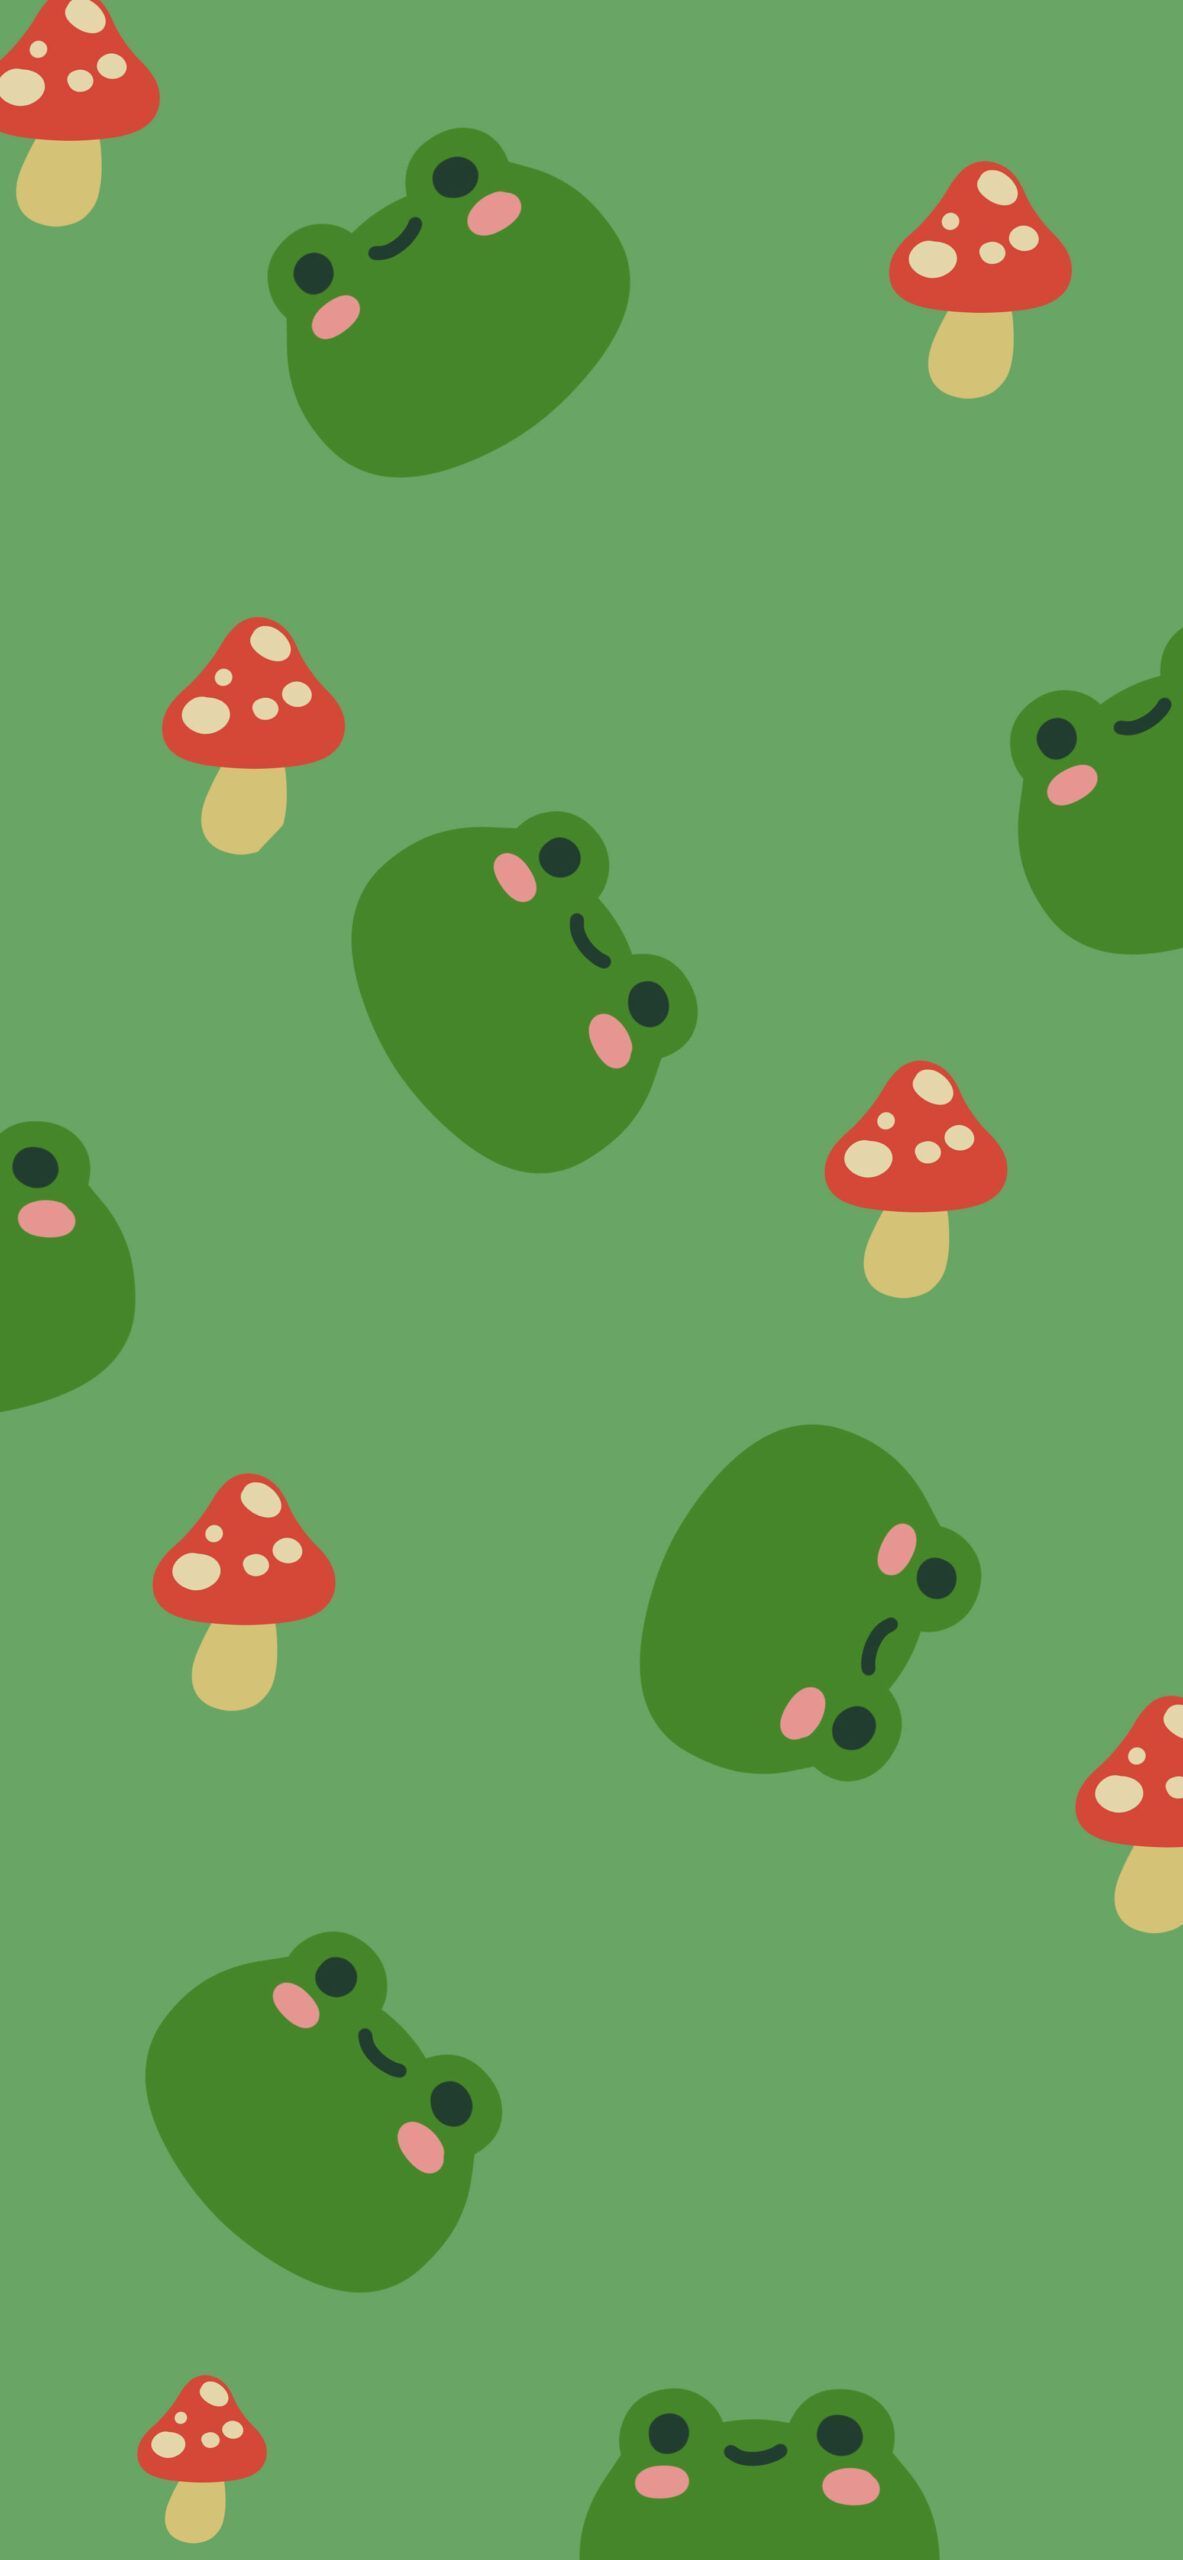 A wallpaper with frogs and mushrooms - Frog, kawaii